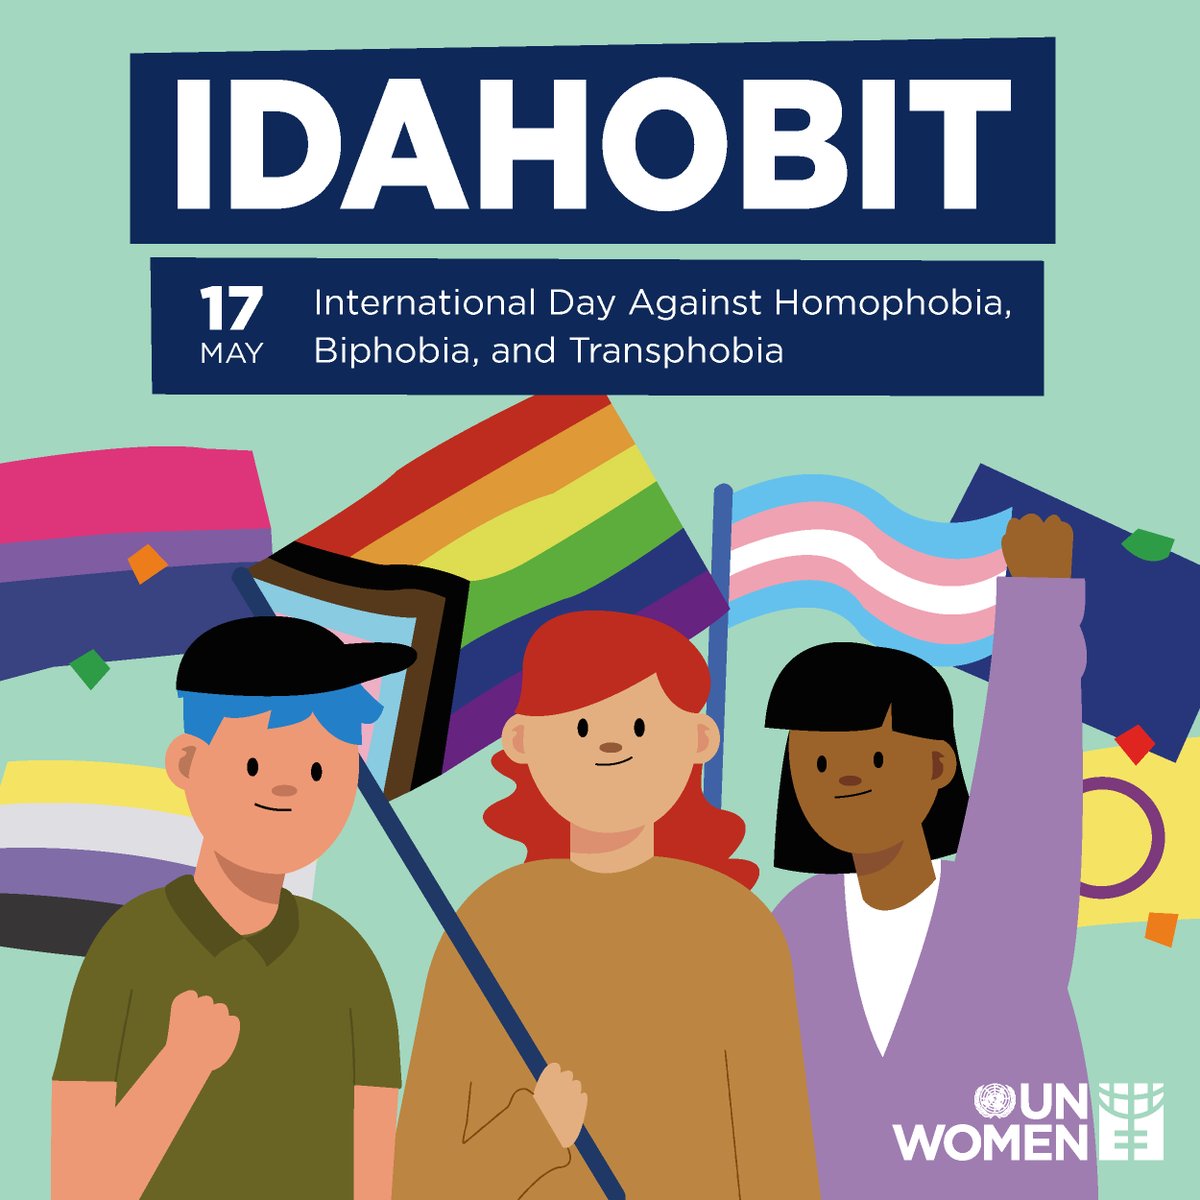 All human beings are born free and equal in dignity & rights. 🏳️‍🌈🏳️‍⚧️

Today is International Day Against Homophobia, Biphobia, & Transphobia.

Join us to raise awareness about the discrimination and violence faced by LGBTQI+ communities worldwide.

#IDAHOBIT